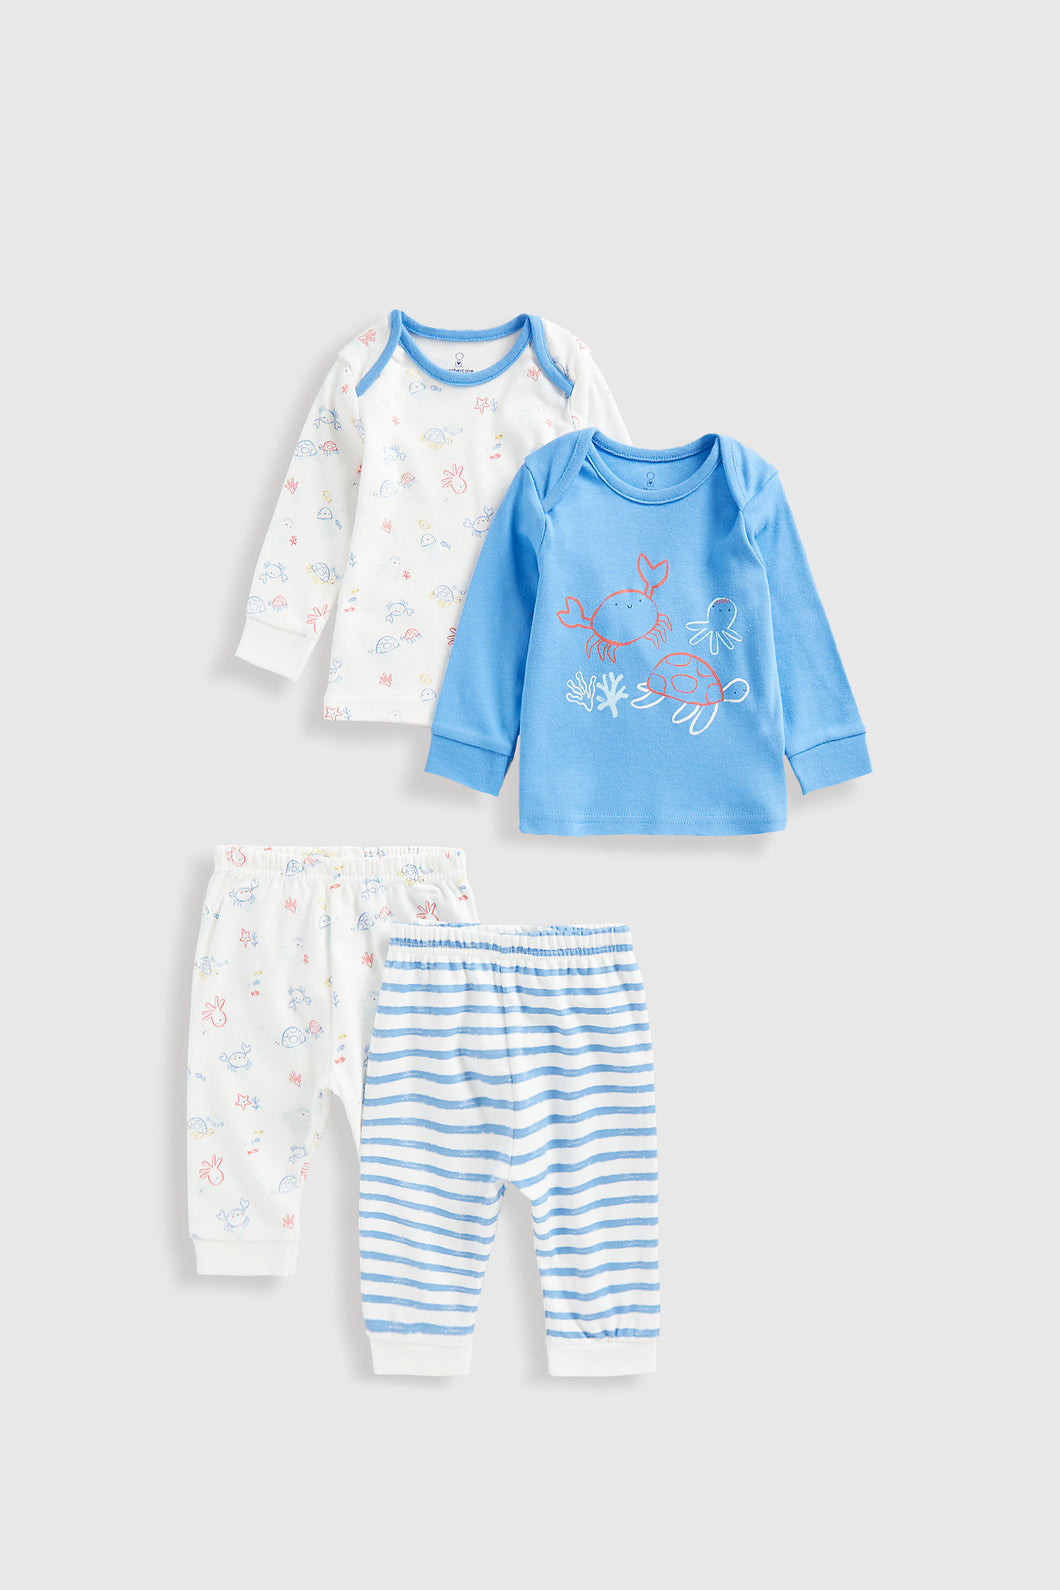 Mothercare Under The Sea Baby Pyjamas - 2 Pack